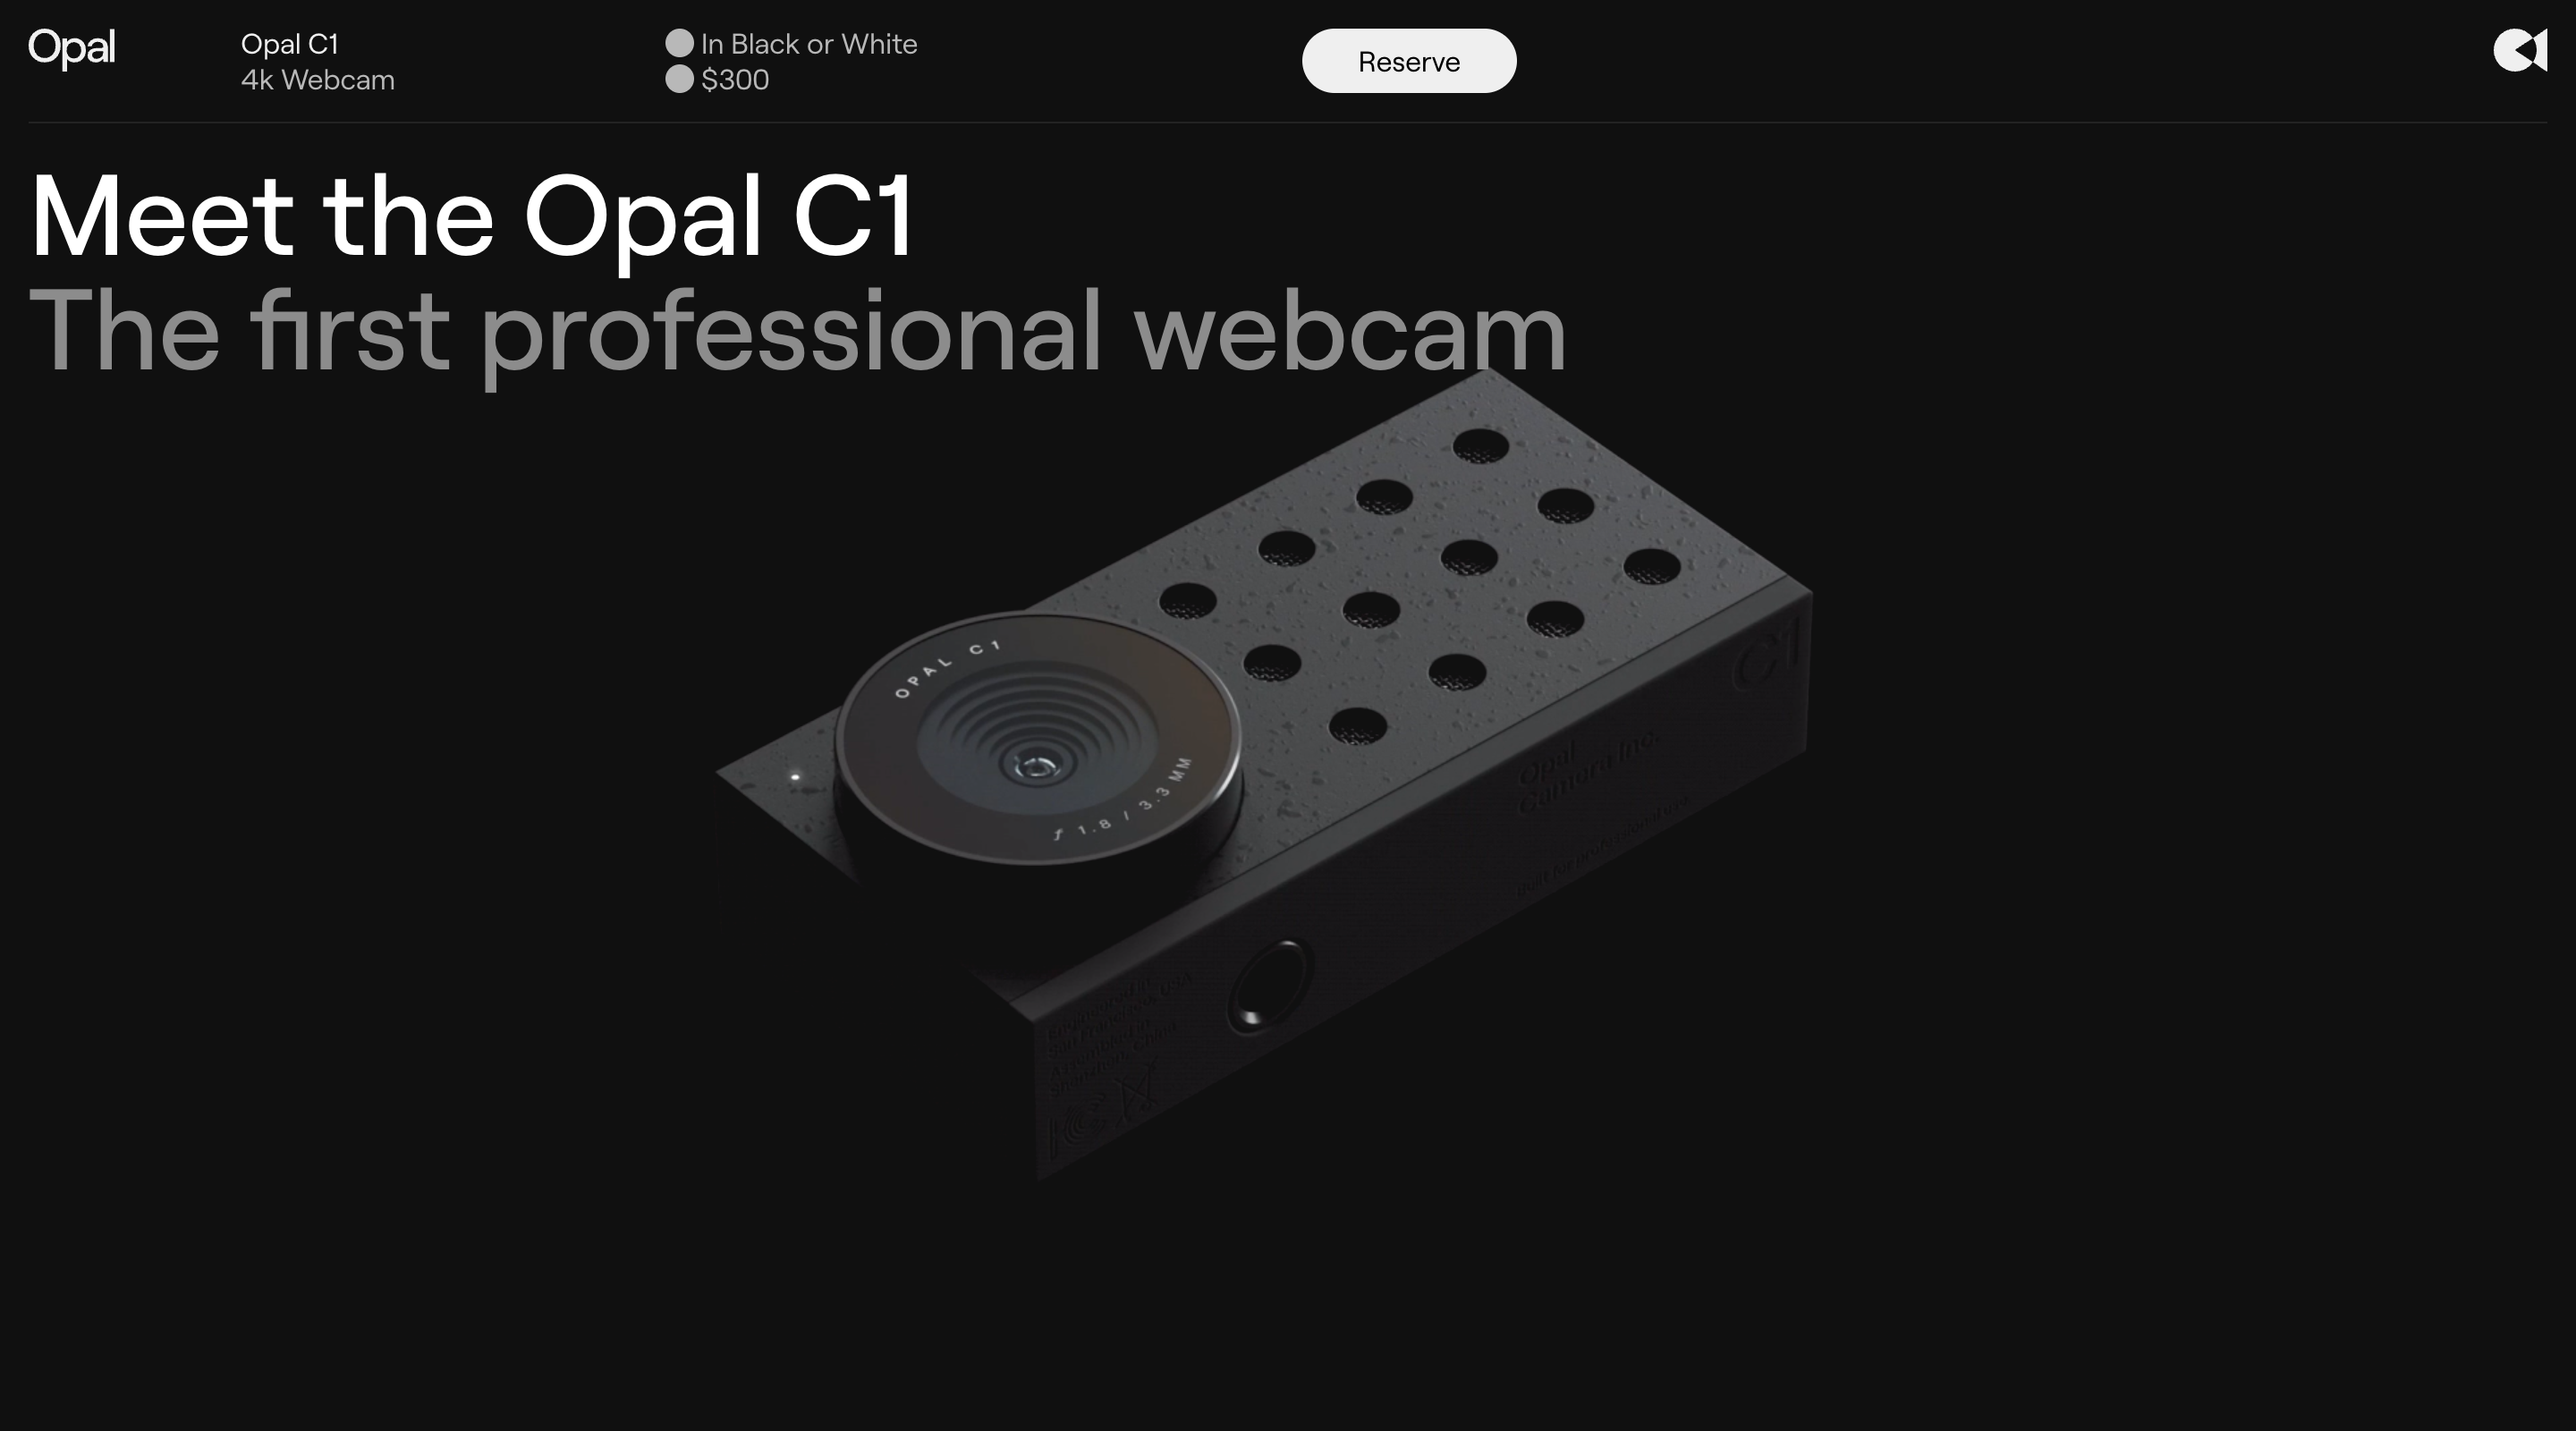 Screenshot of the Opal home page. The header contains the Opal logo, brief product information, and a 'Reserve' button. The hero section has a title in large lettering and the background image shows the Opal C1 webcam on a black backdrop.